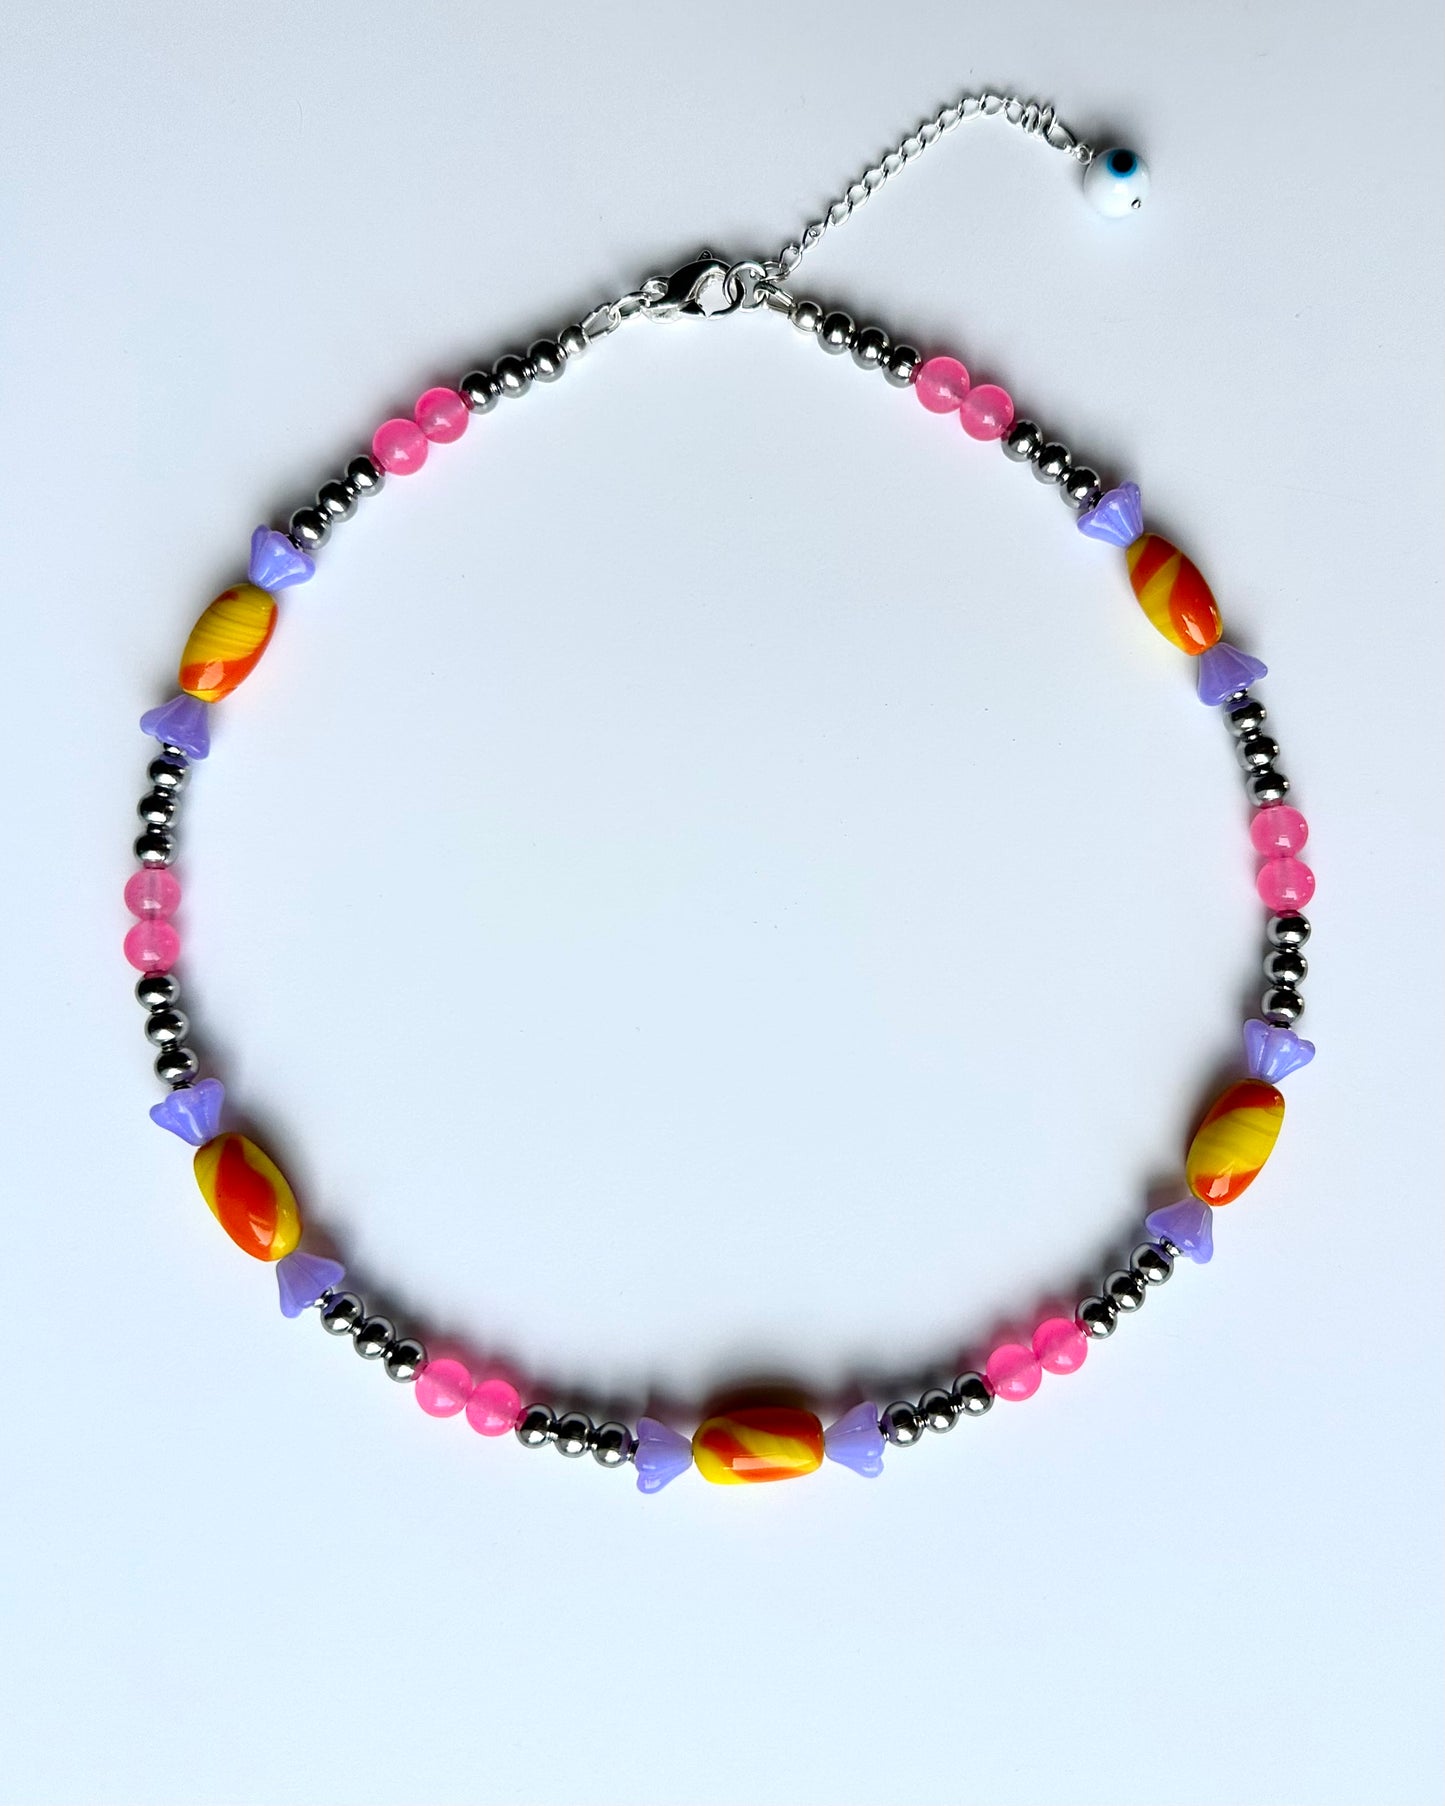 Gooselumps: ☠️🍬🌽 ULTRA CURSED CANDY CORN NECKLACE 🌽🍬☠️